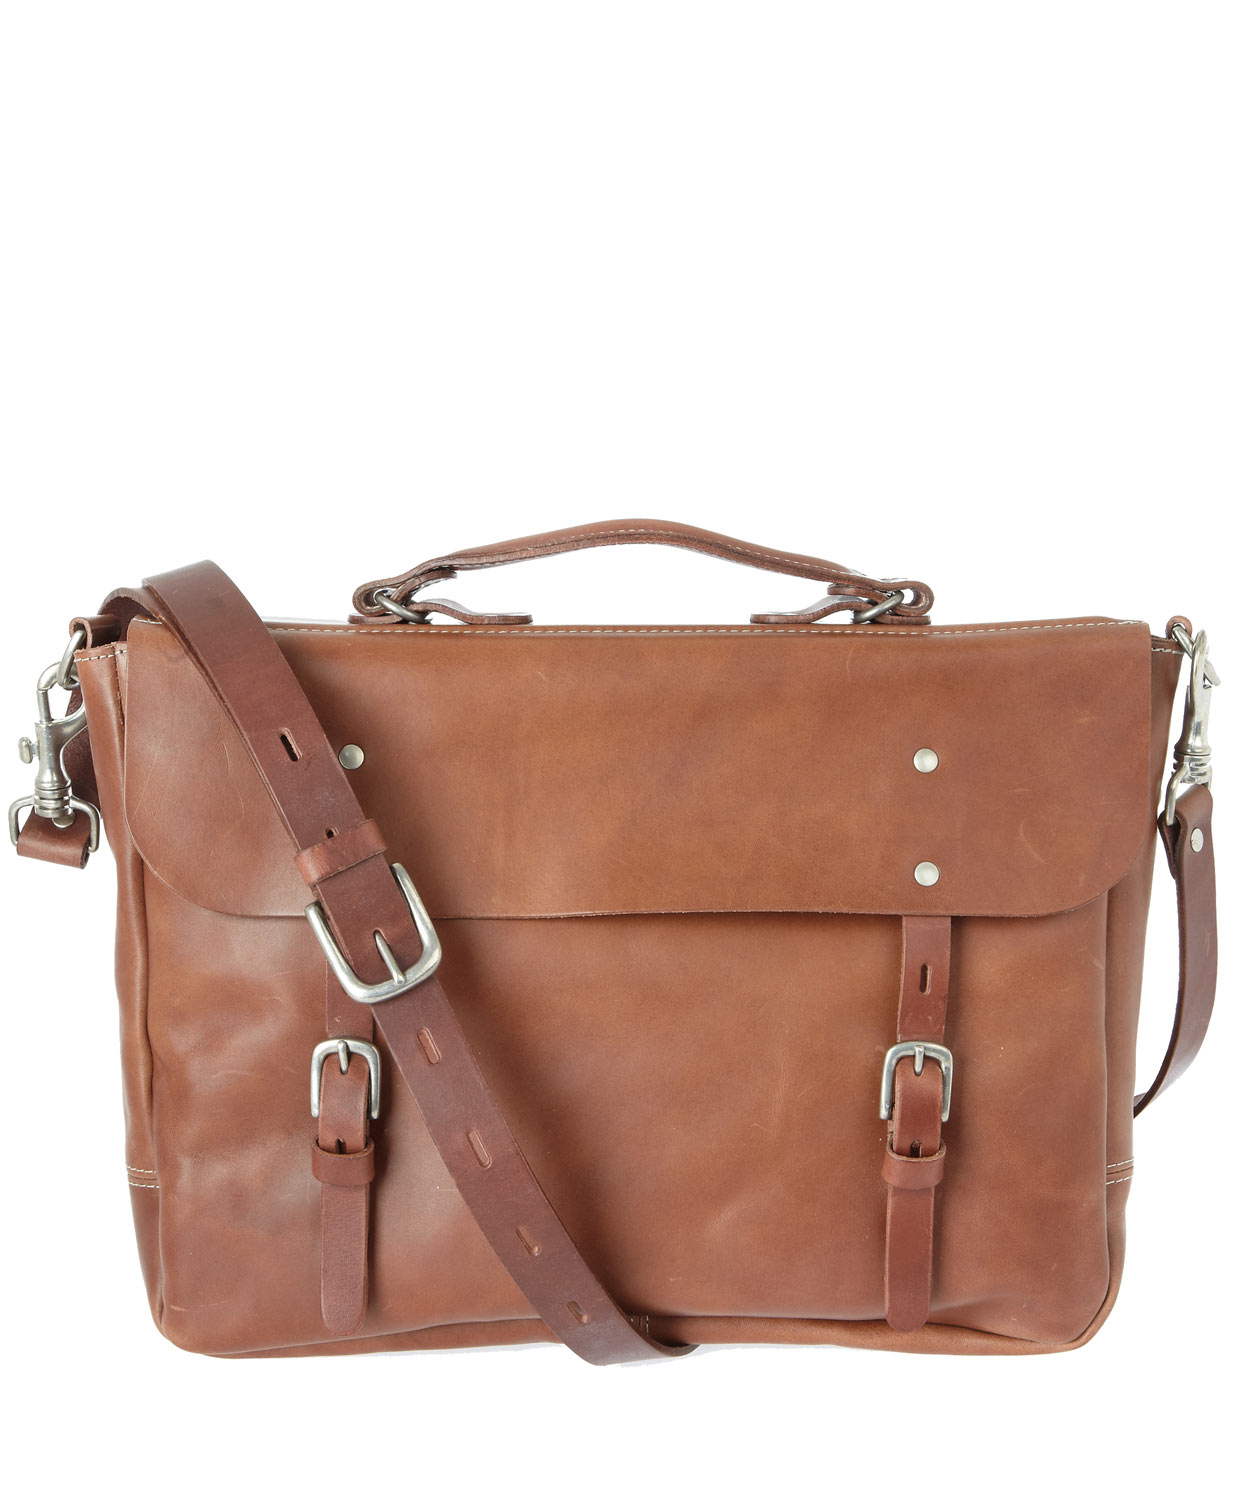 Lyst - Ally Capellino Tan Leather Richard Satchel in Brown for Men